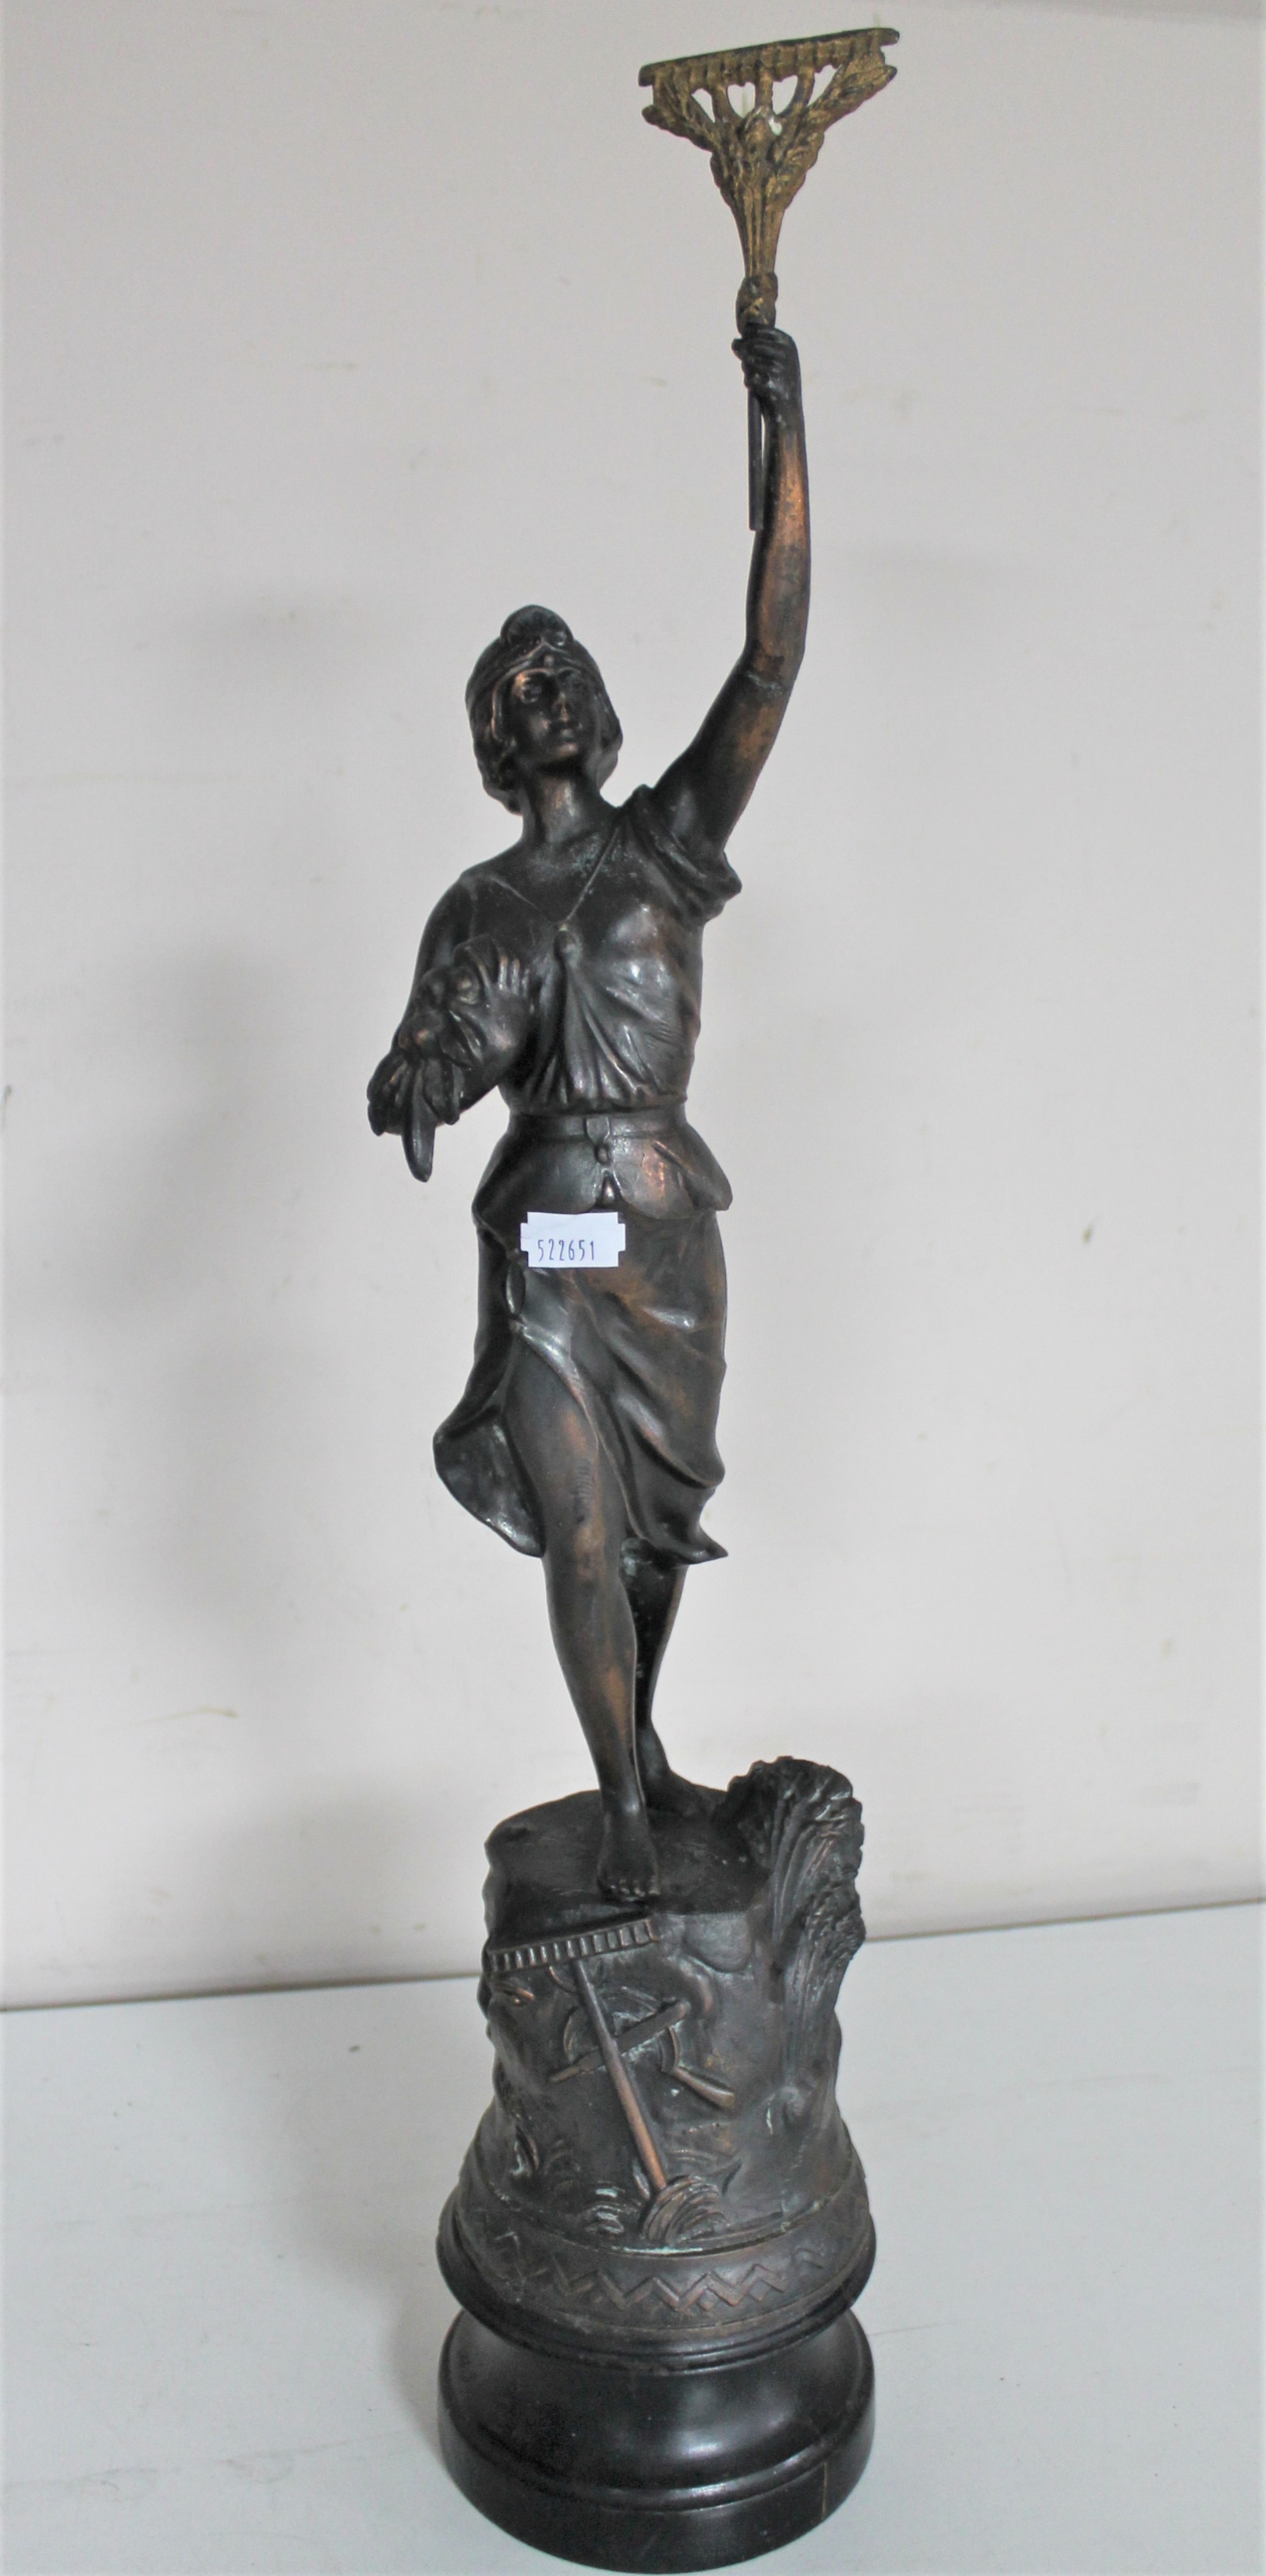 An antique spelter figure of a female with arm raised